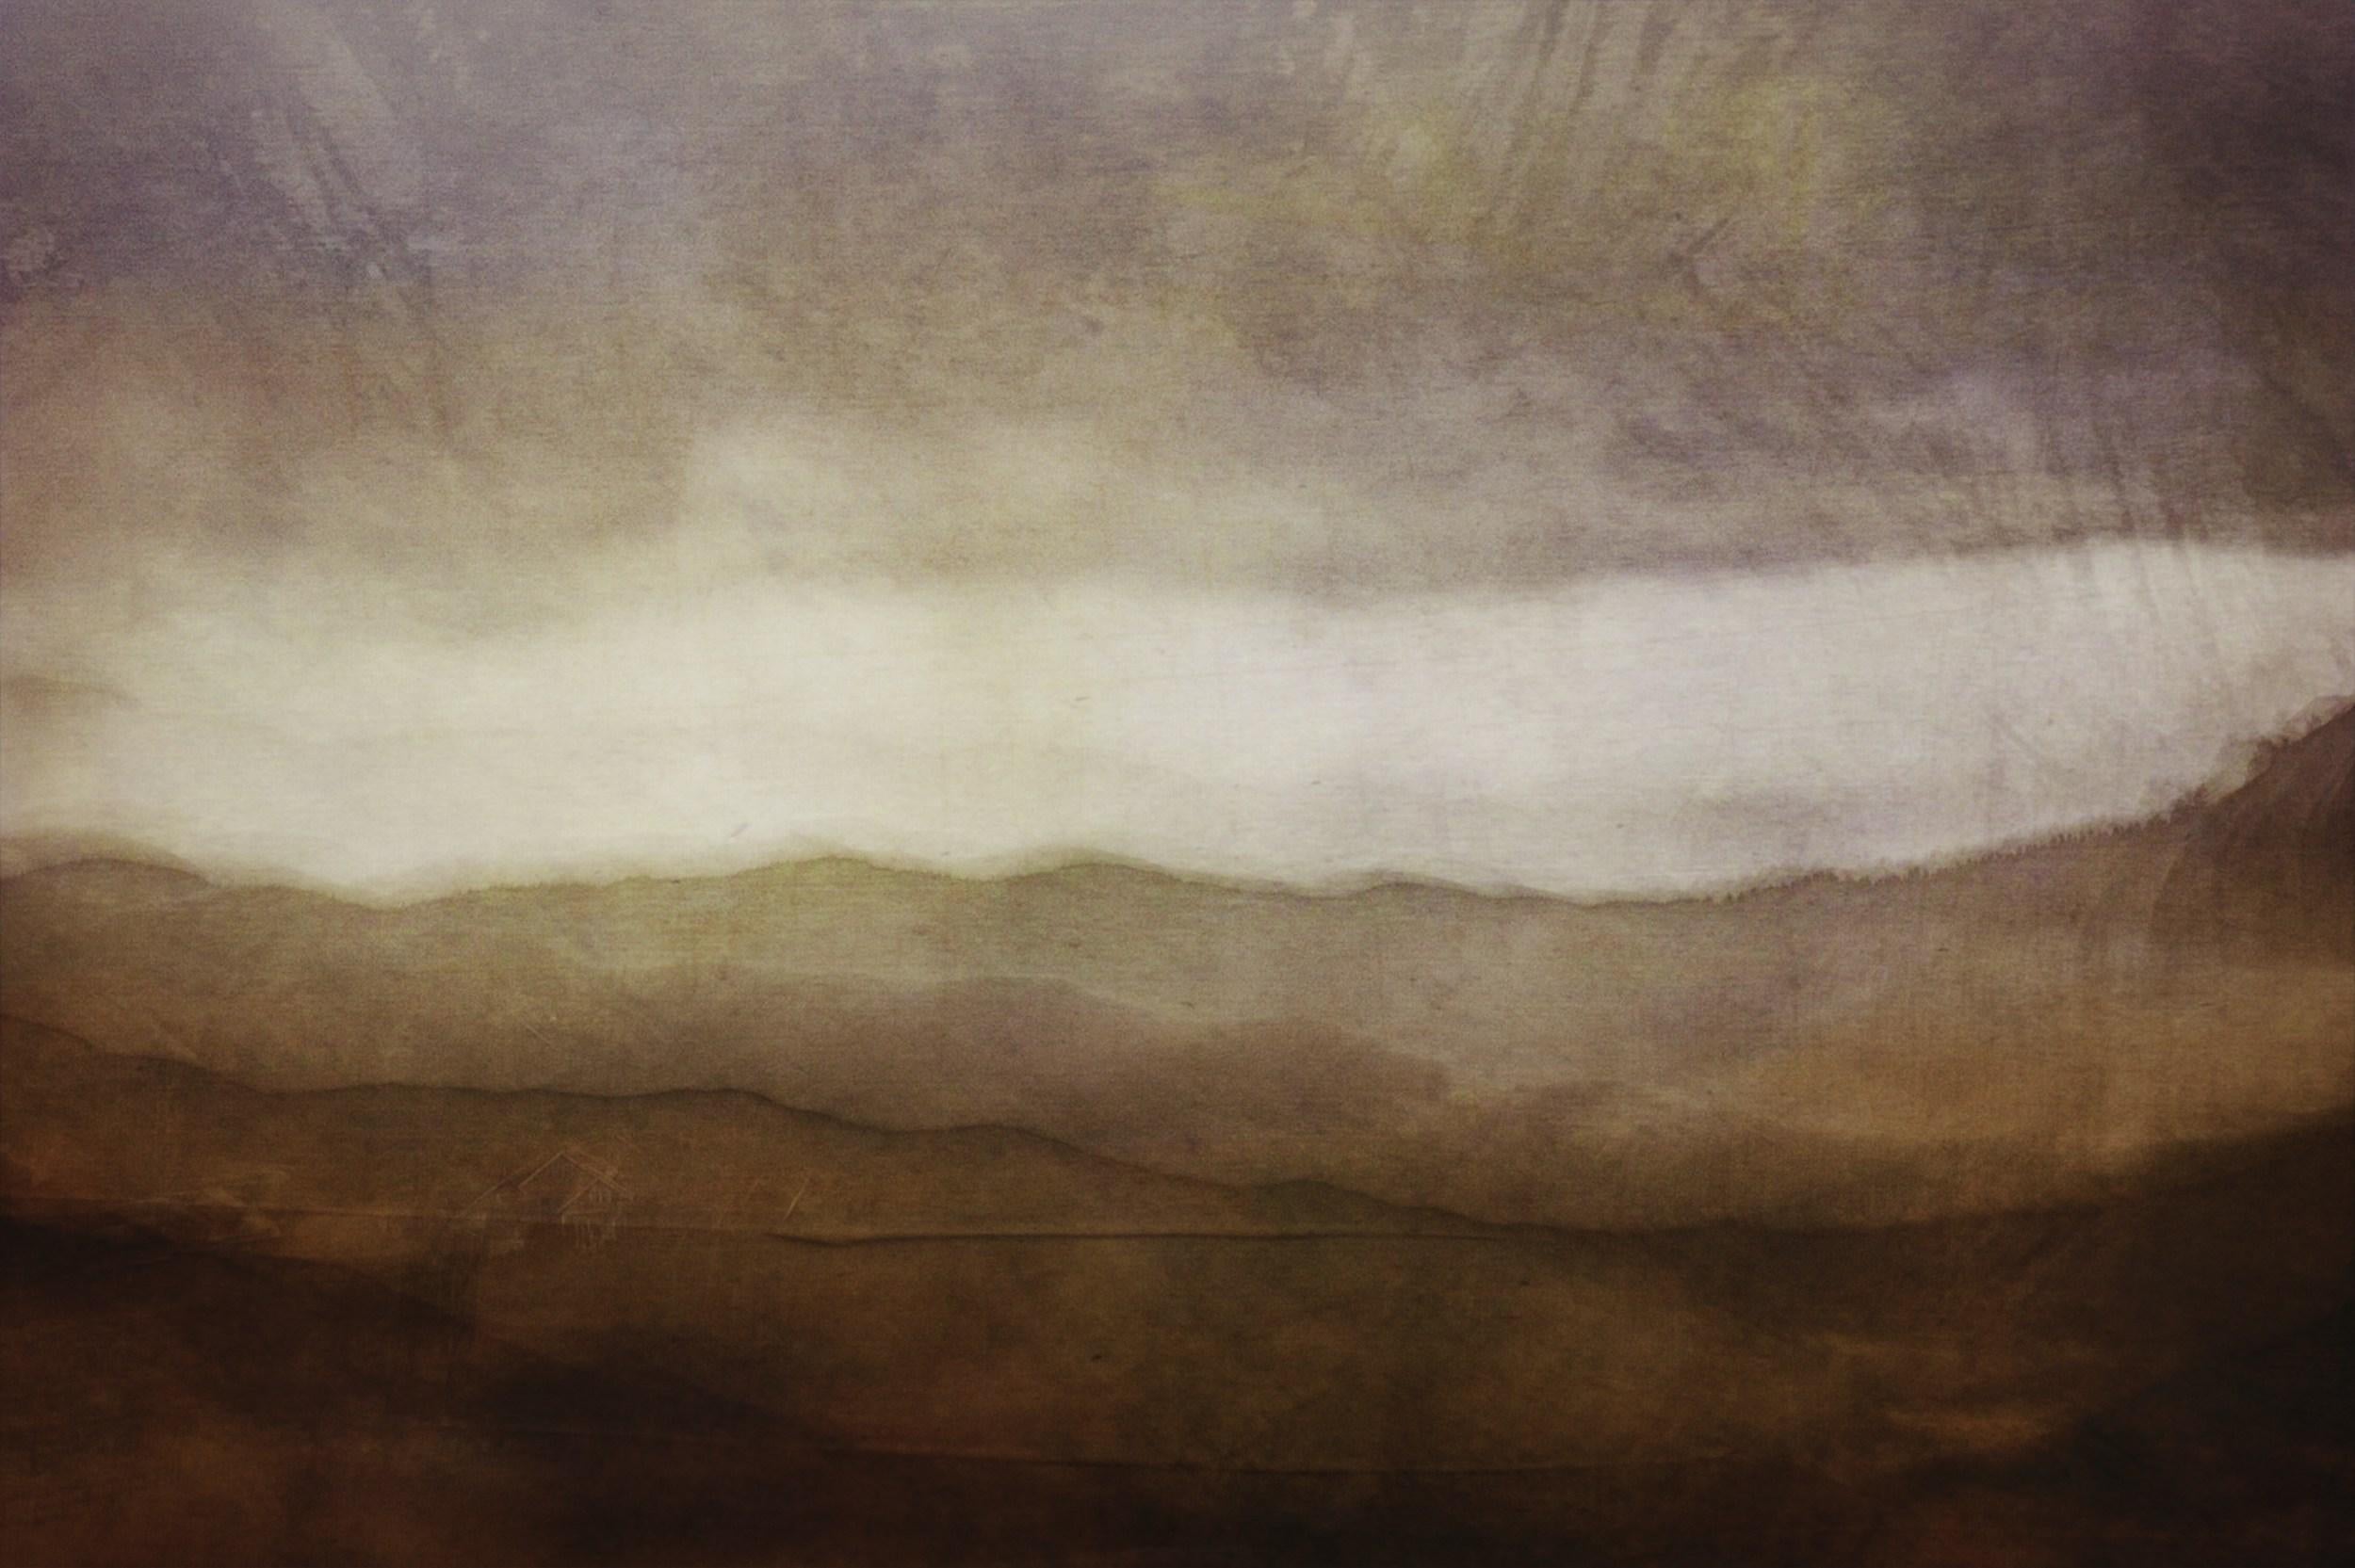 Jeffrey Tamblyn Landscape Photograph - Foothills (landscape, abstract, muted colors, intentional camera movement)